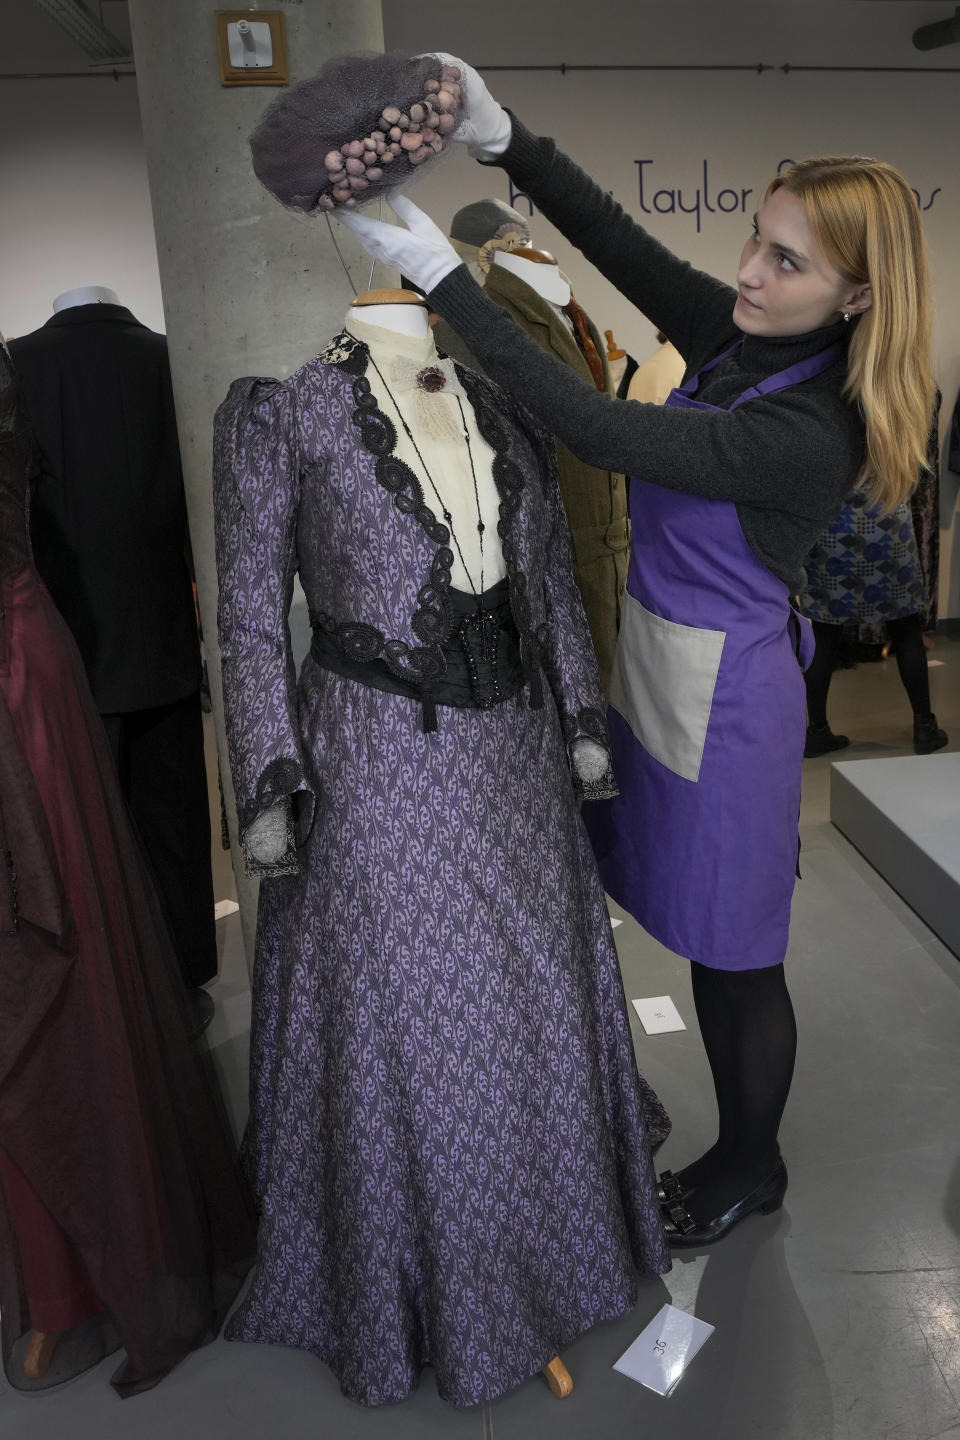 A costume handler arranges Dame Maggie Smith's costume as Violet Dowager, Countess of Grantham in Downton Abbey 2010, at Kerry Taylor Auctions in London, Tuesday, Feb. 27, 2024. The costume estimated at 800-1,200 UK Pounds (1,000-1,500 US Dollars) is one of 69 that will be for auction in the Lights Camera Auction event on March 5. The costumes have been donated by Cosprop in support of The Bright Foundation, an arts education charity, established and funded by John Bright, to provide life-enhancing, creative experiences for children and young people facing disadvantage. (AP Photo/Kirsty Wigglesworth)